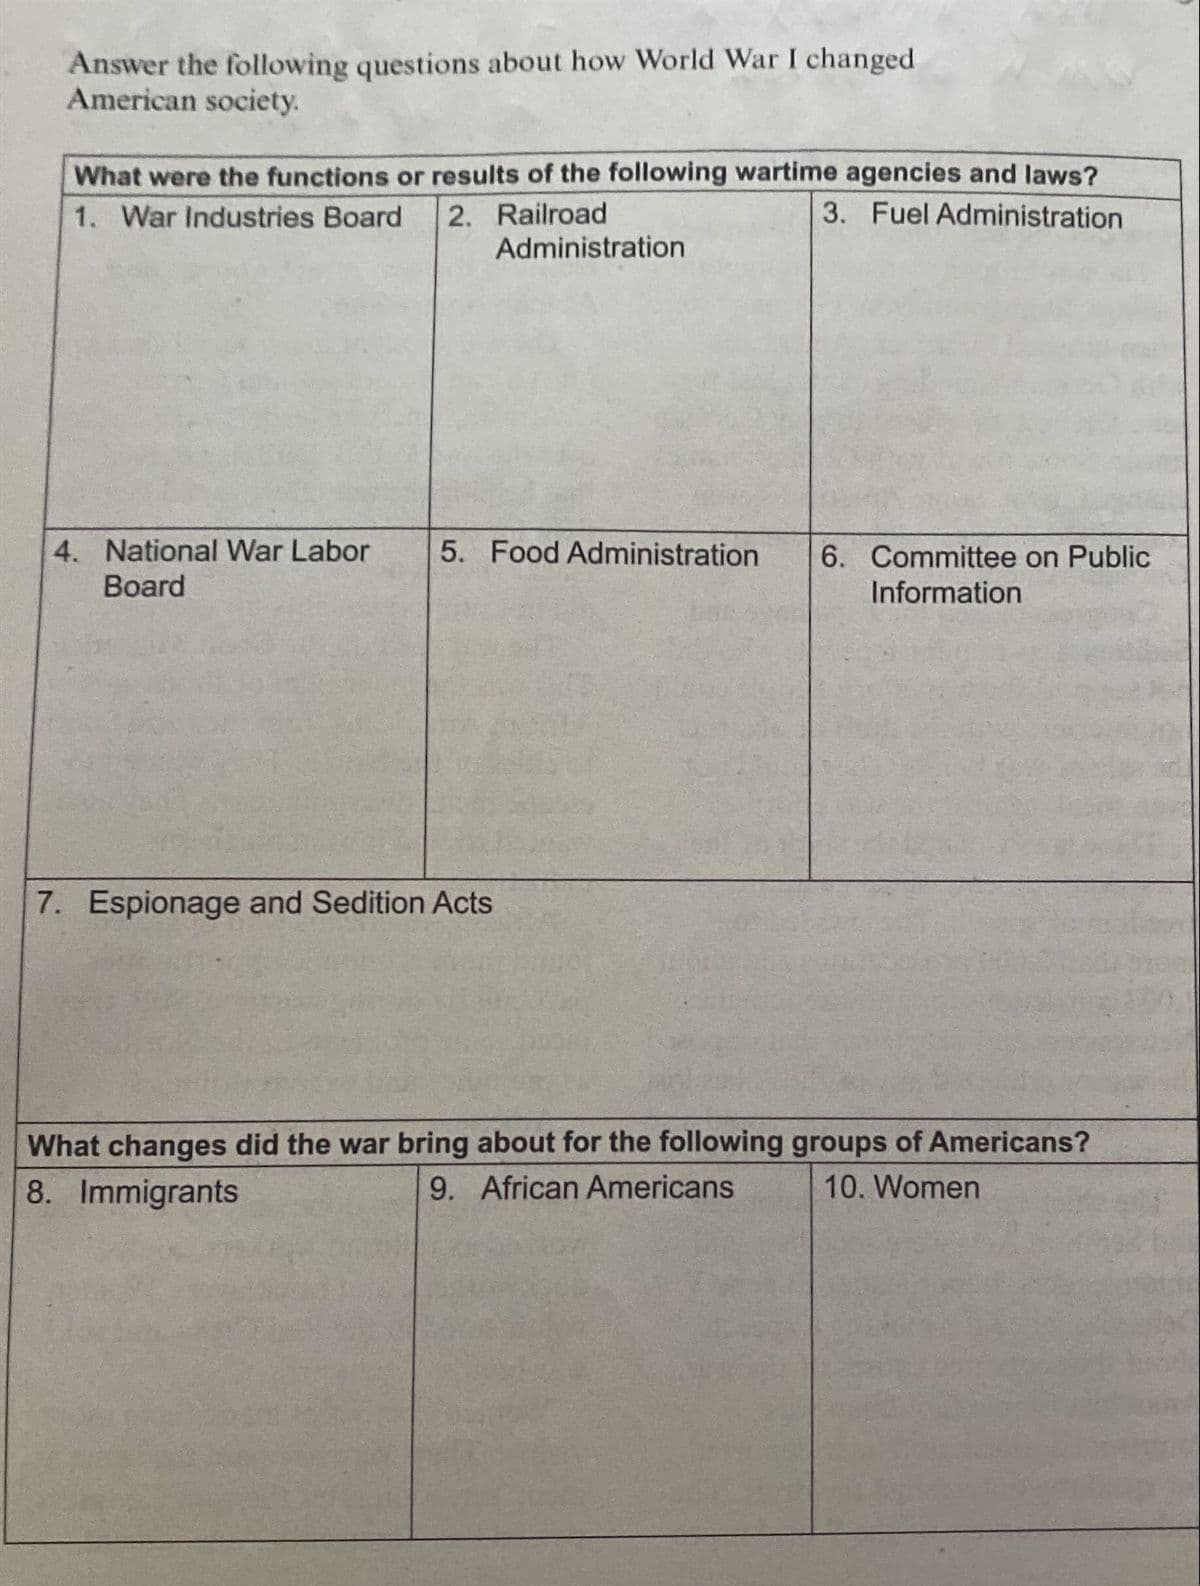 Answer the following questions about how World War I changed
American society.
What were the functions or results of the following wartime agencies and laws?
3. Fuel Administration
2. Railroad
Administration
1. War Industries Board
4. National War Labor
Board
5. Food Administration
6. Committee on Public
Information
7. Espionage and Sedition Acts
What changes did the war bring about for the following groups of Americans?
9. African Americans
8. Immigrants
10. Women
